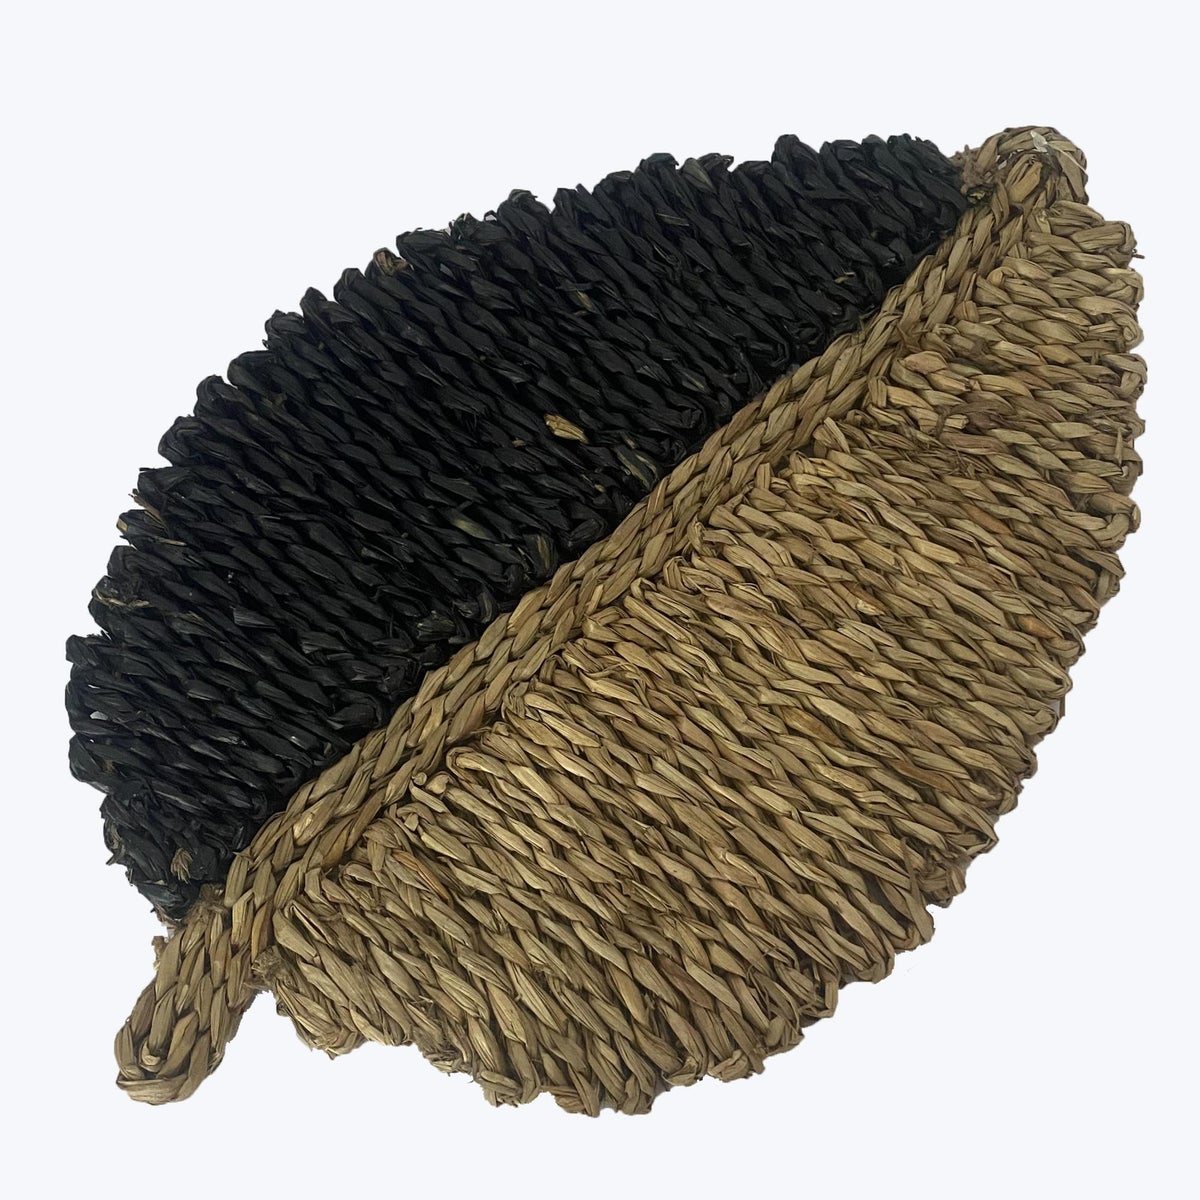 Seagrass Woven Leaf Wall/Tabletop Decor